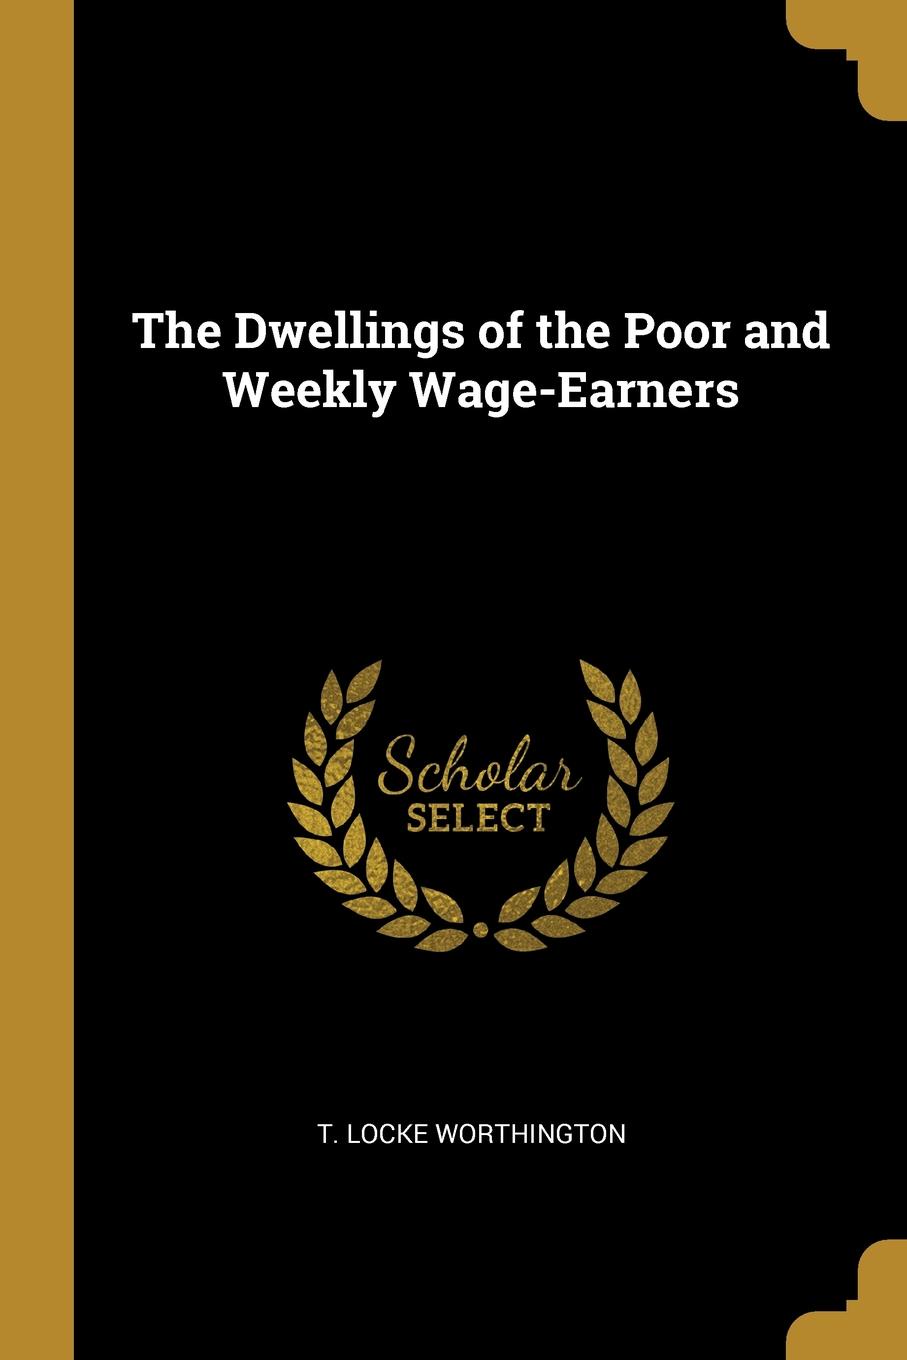 The Dwellings of the Poor and Weekly Wage-Earners